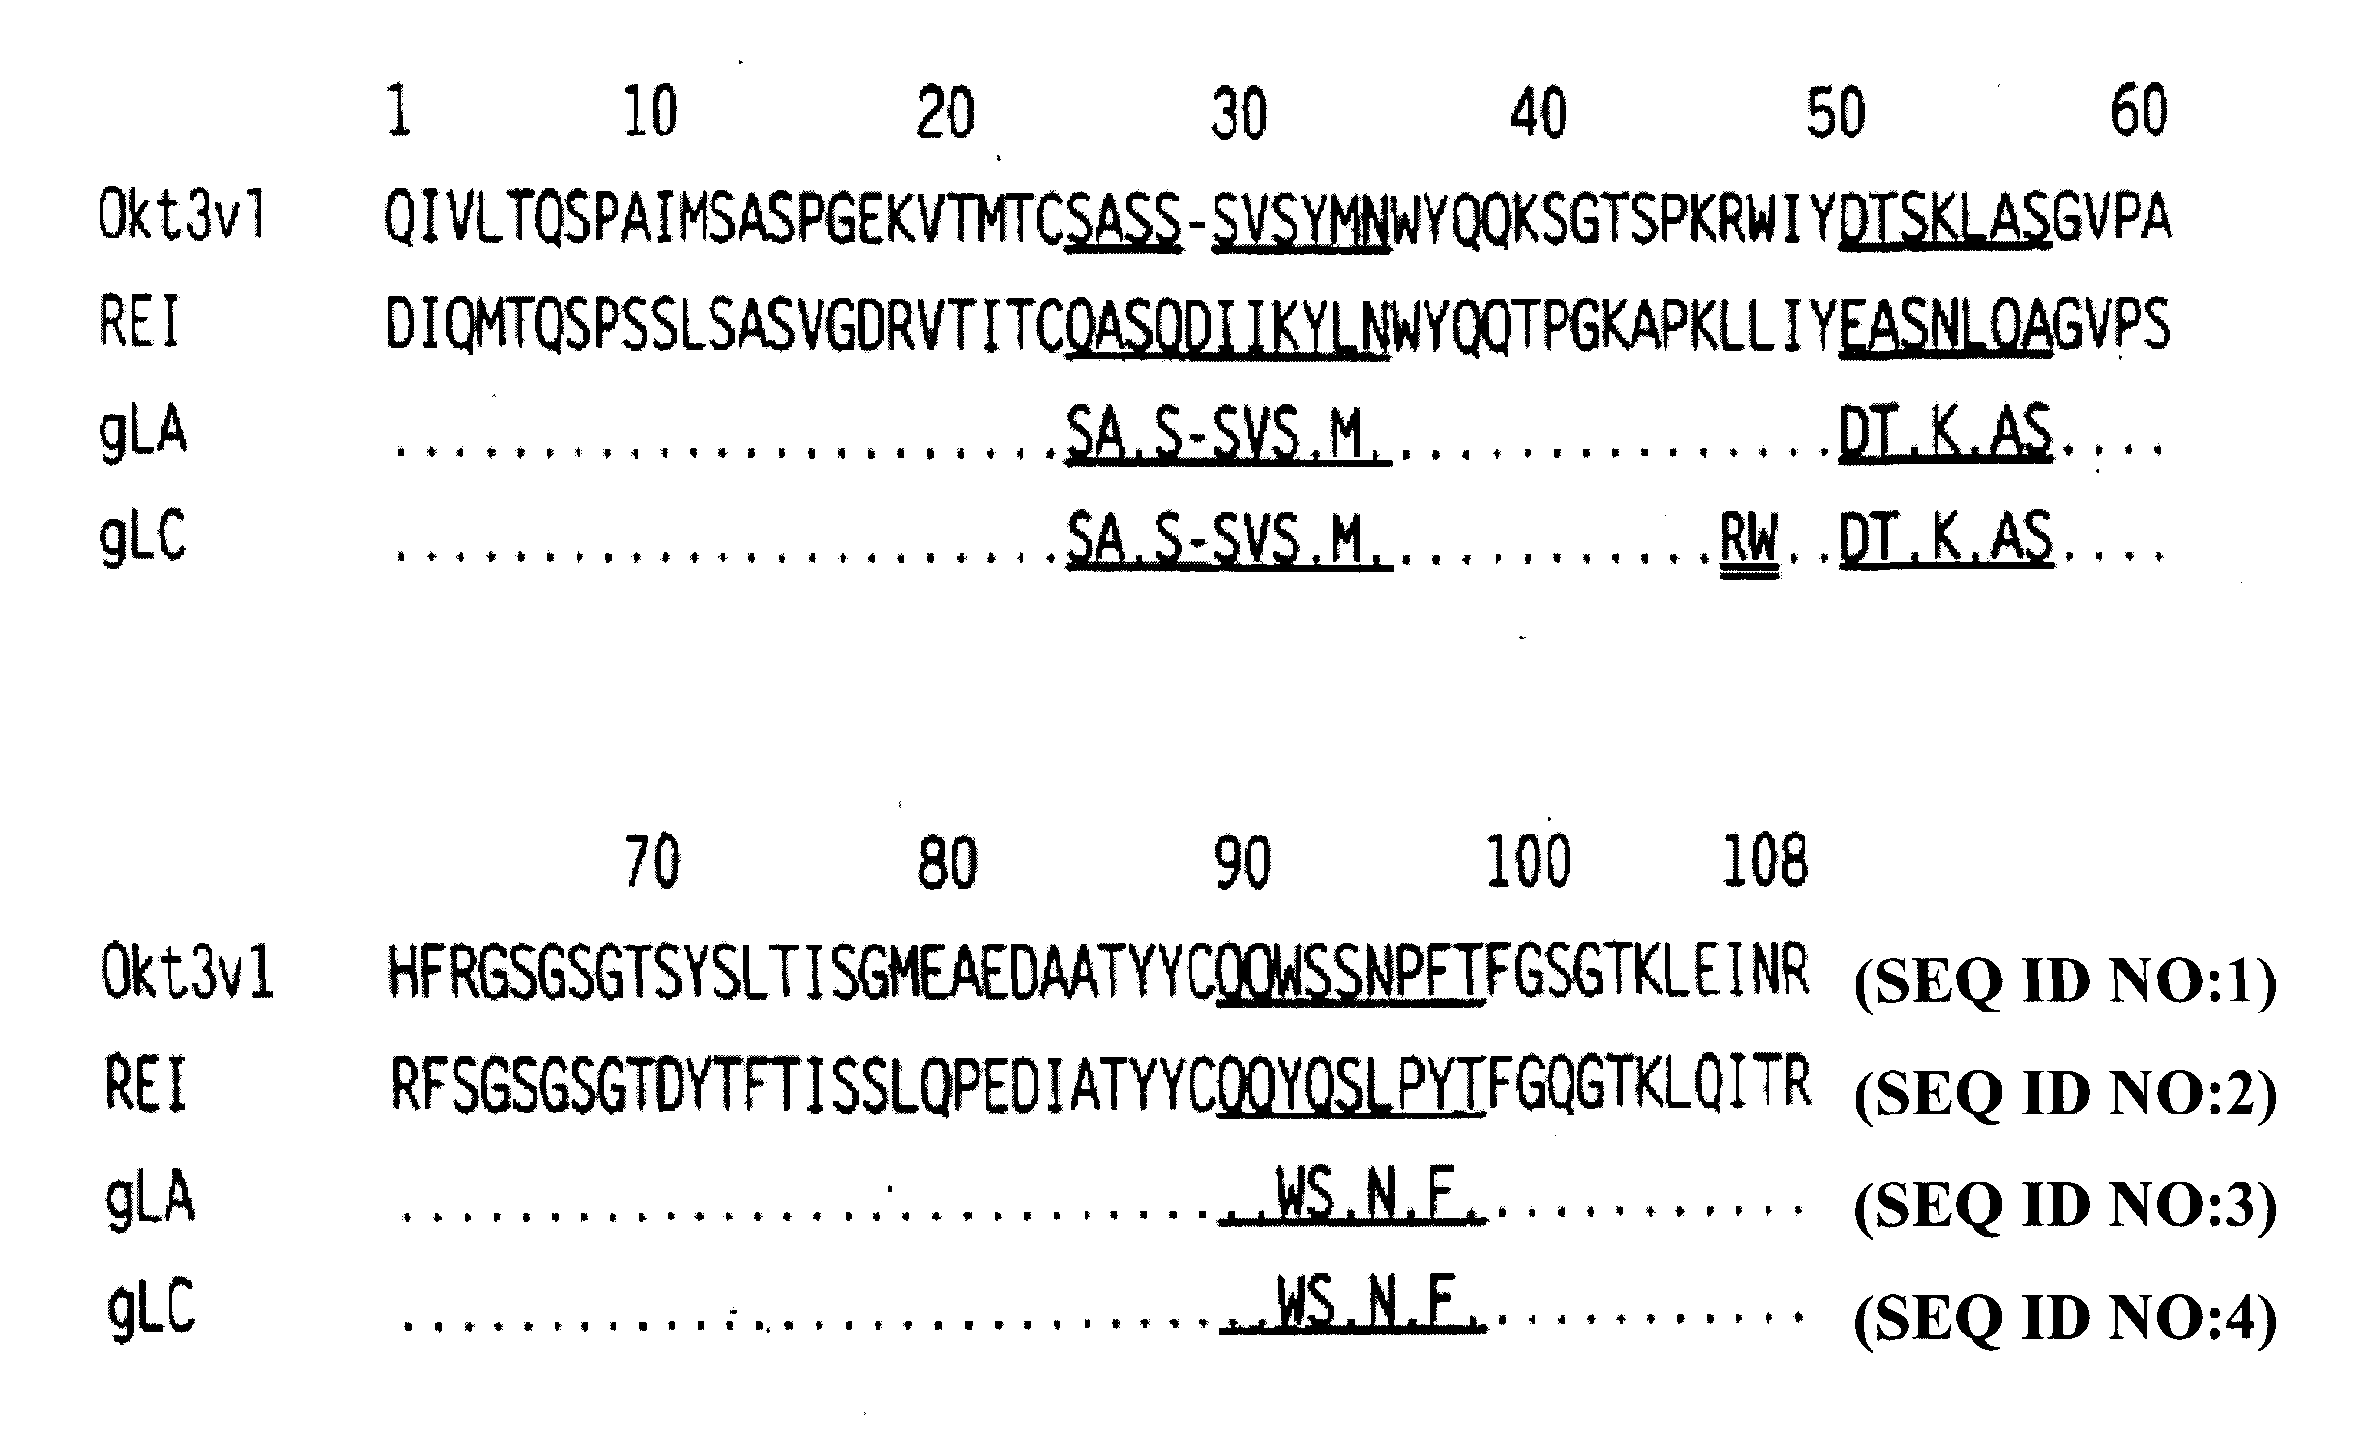 Methods for the treatment of lada and other adult- onset autoimmune using immunosuppressive monoclonal antibodies with reduced toxicity